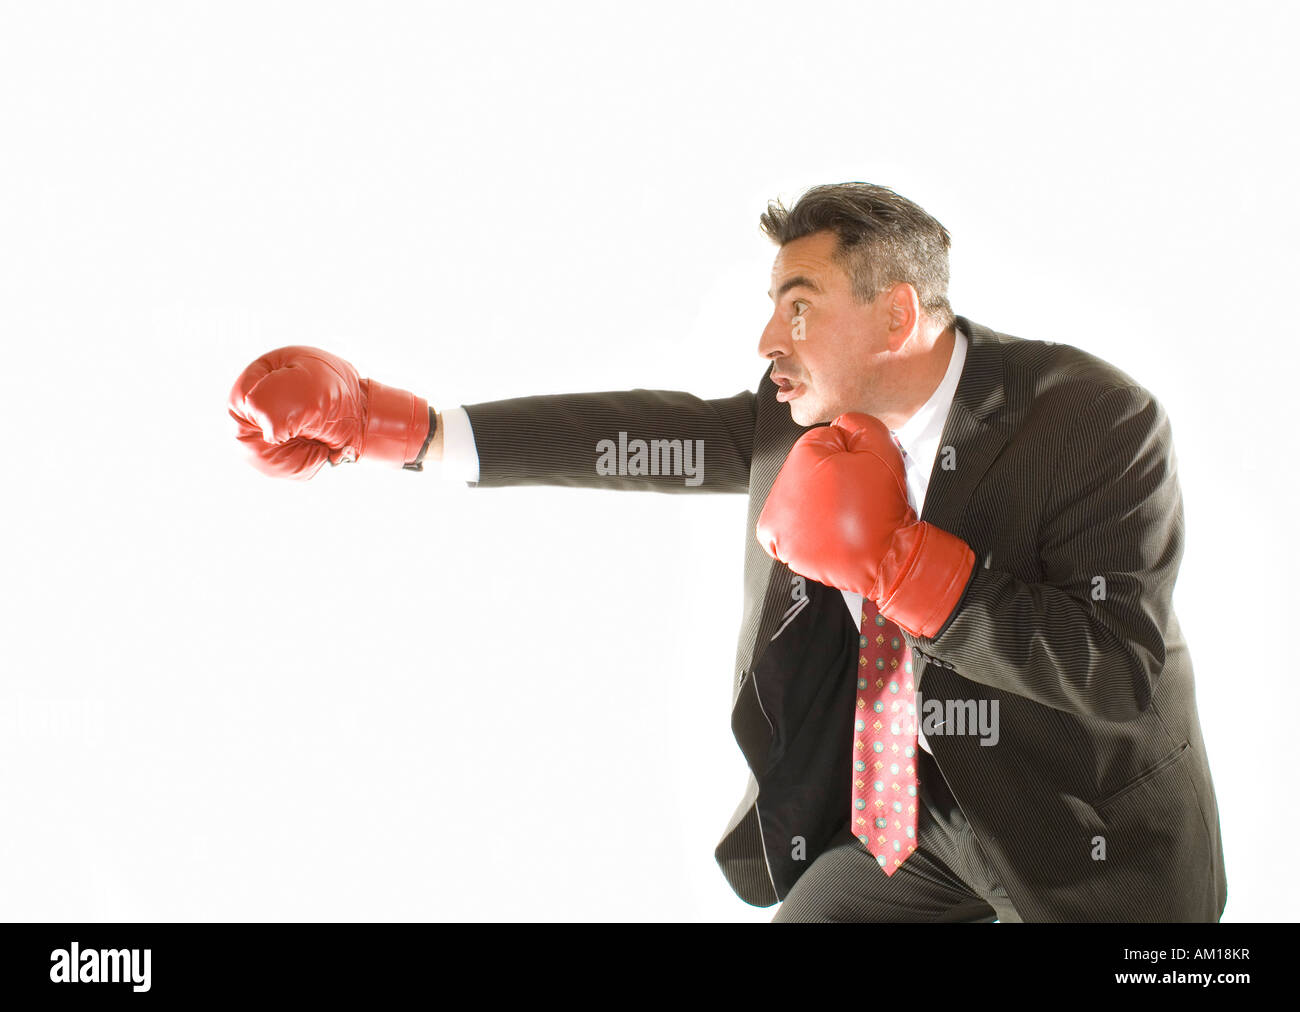 Businessman with boxing gloves Stock Photo